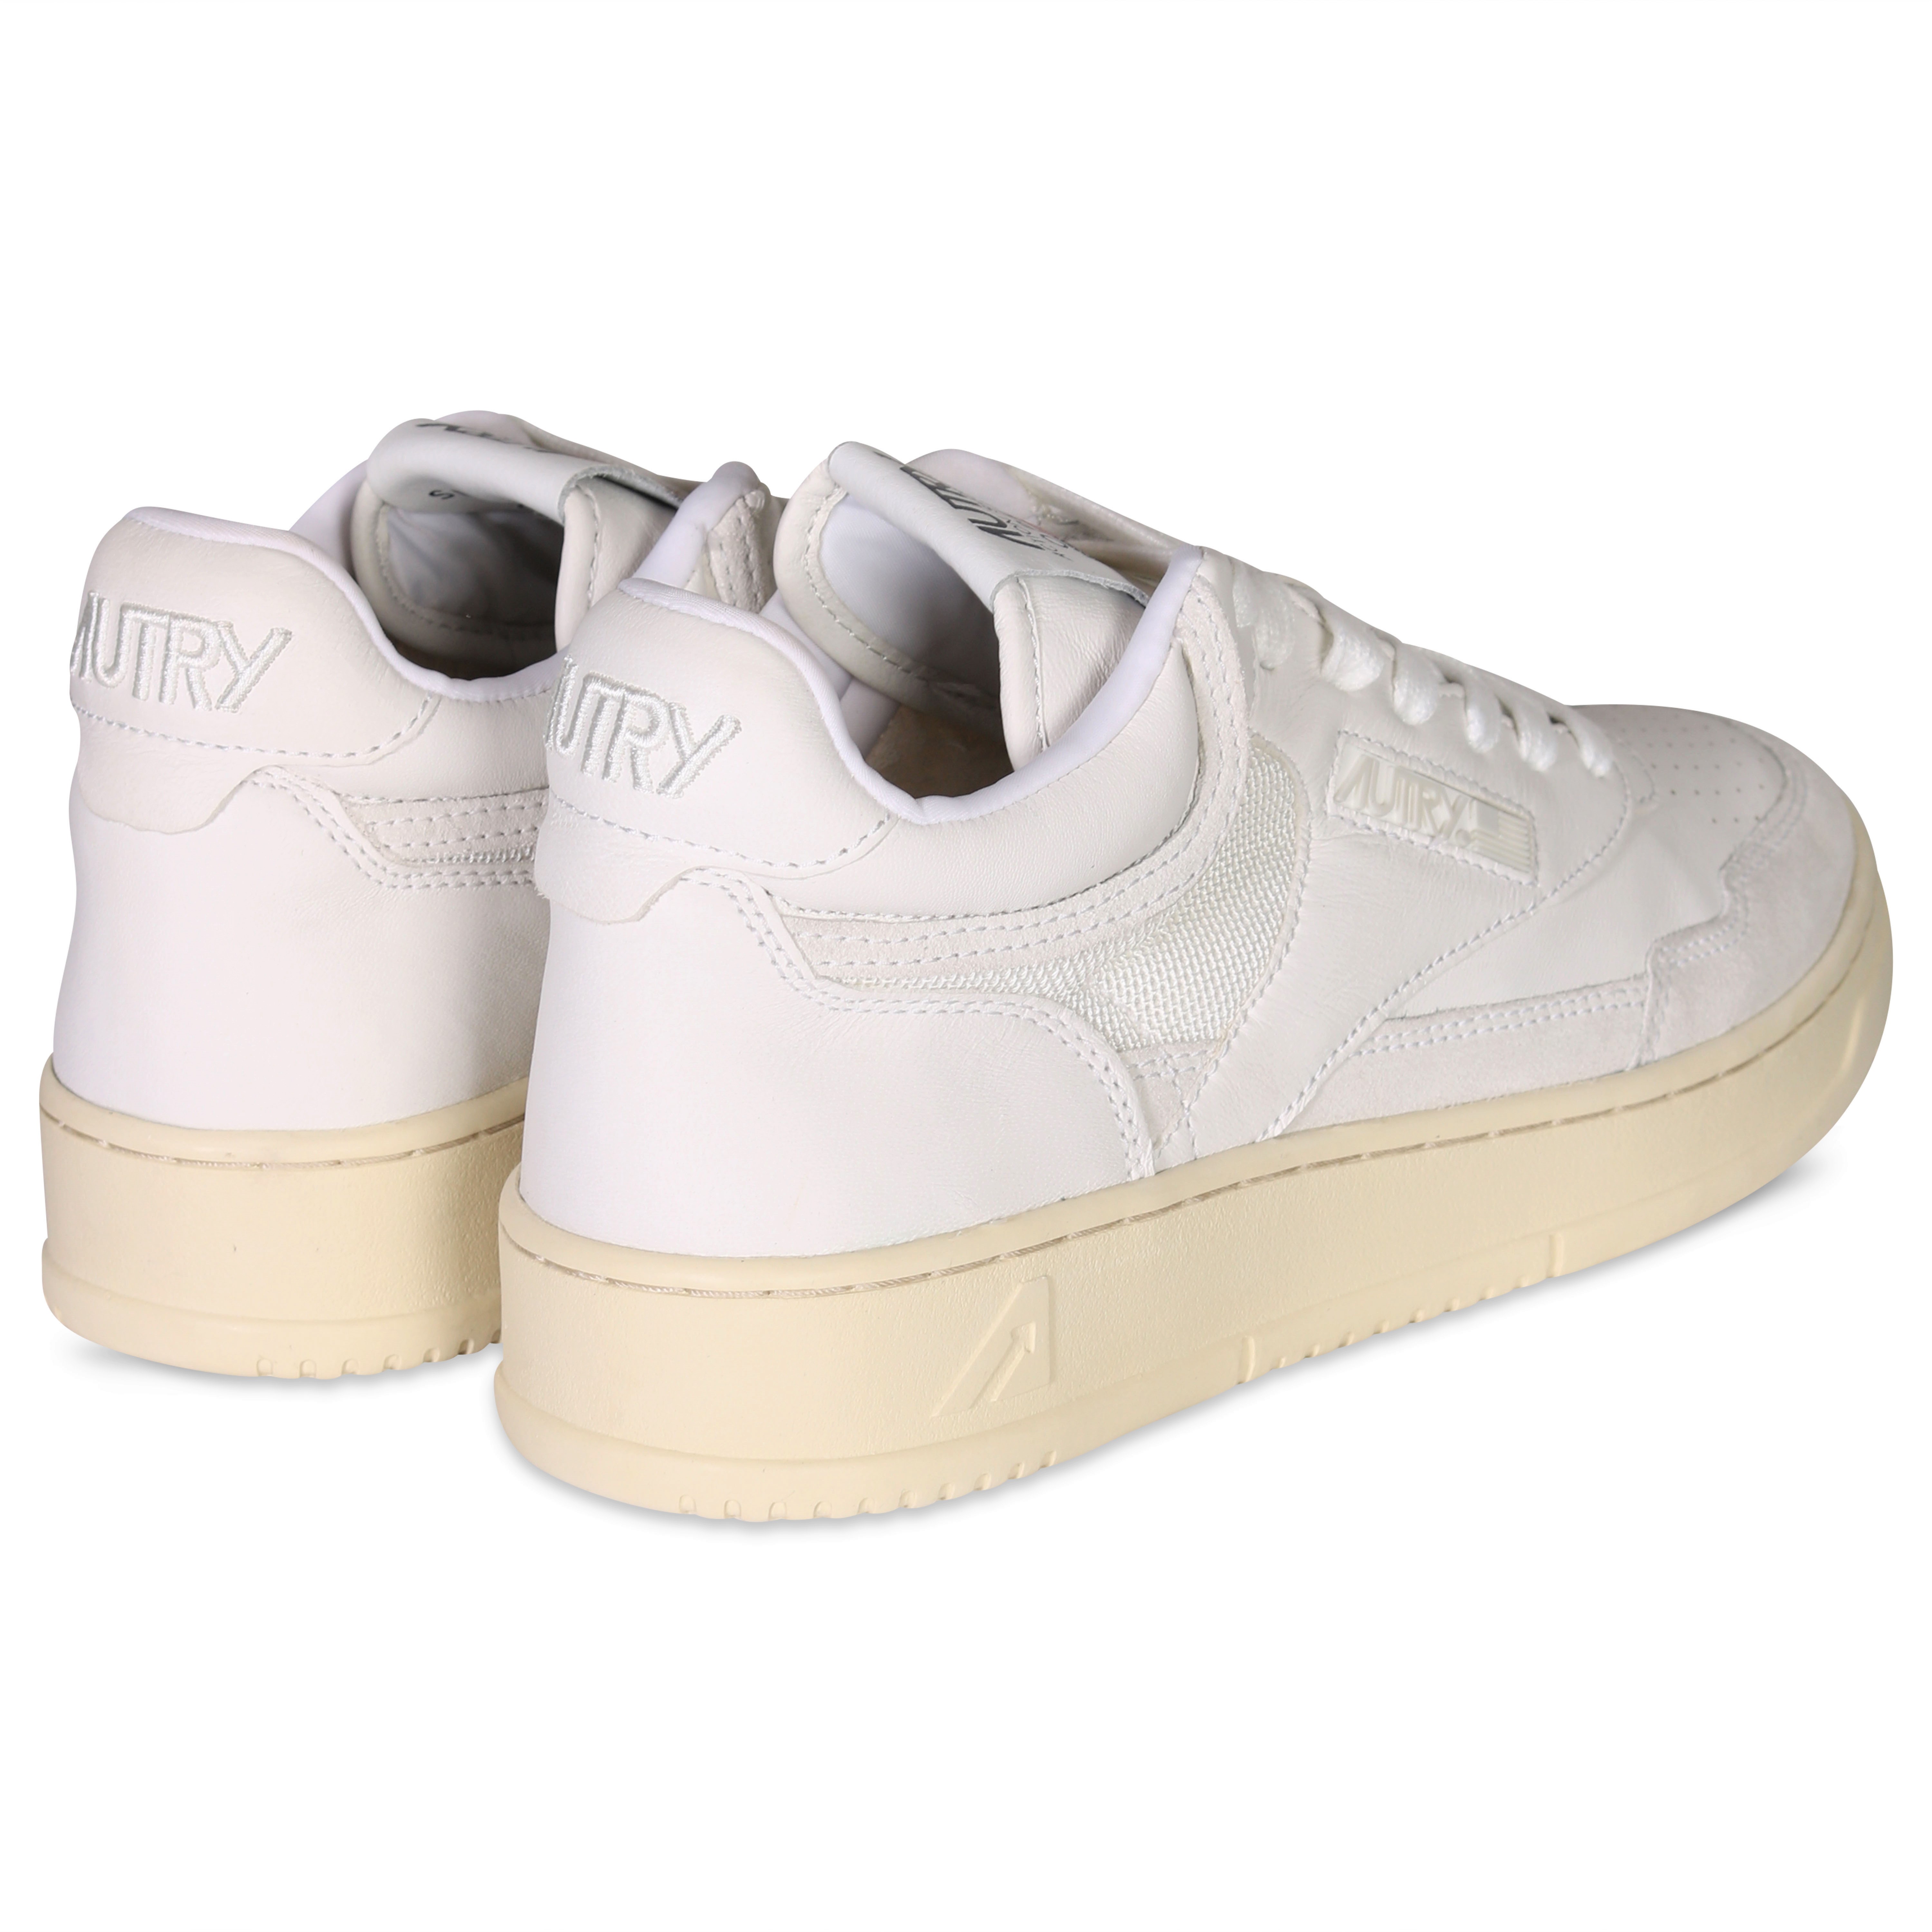 Autry Action Shoes Mid Open All White